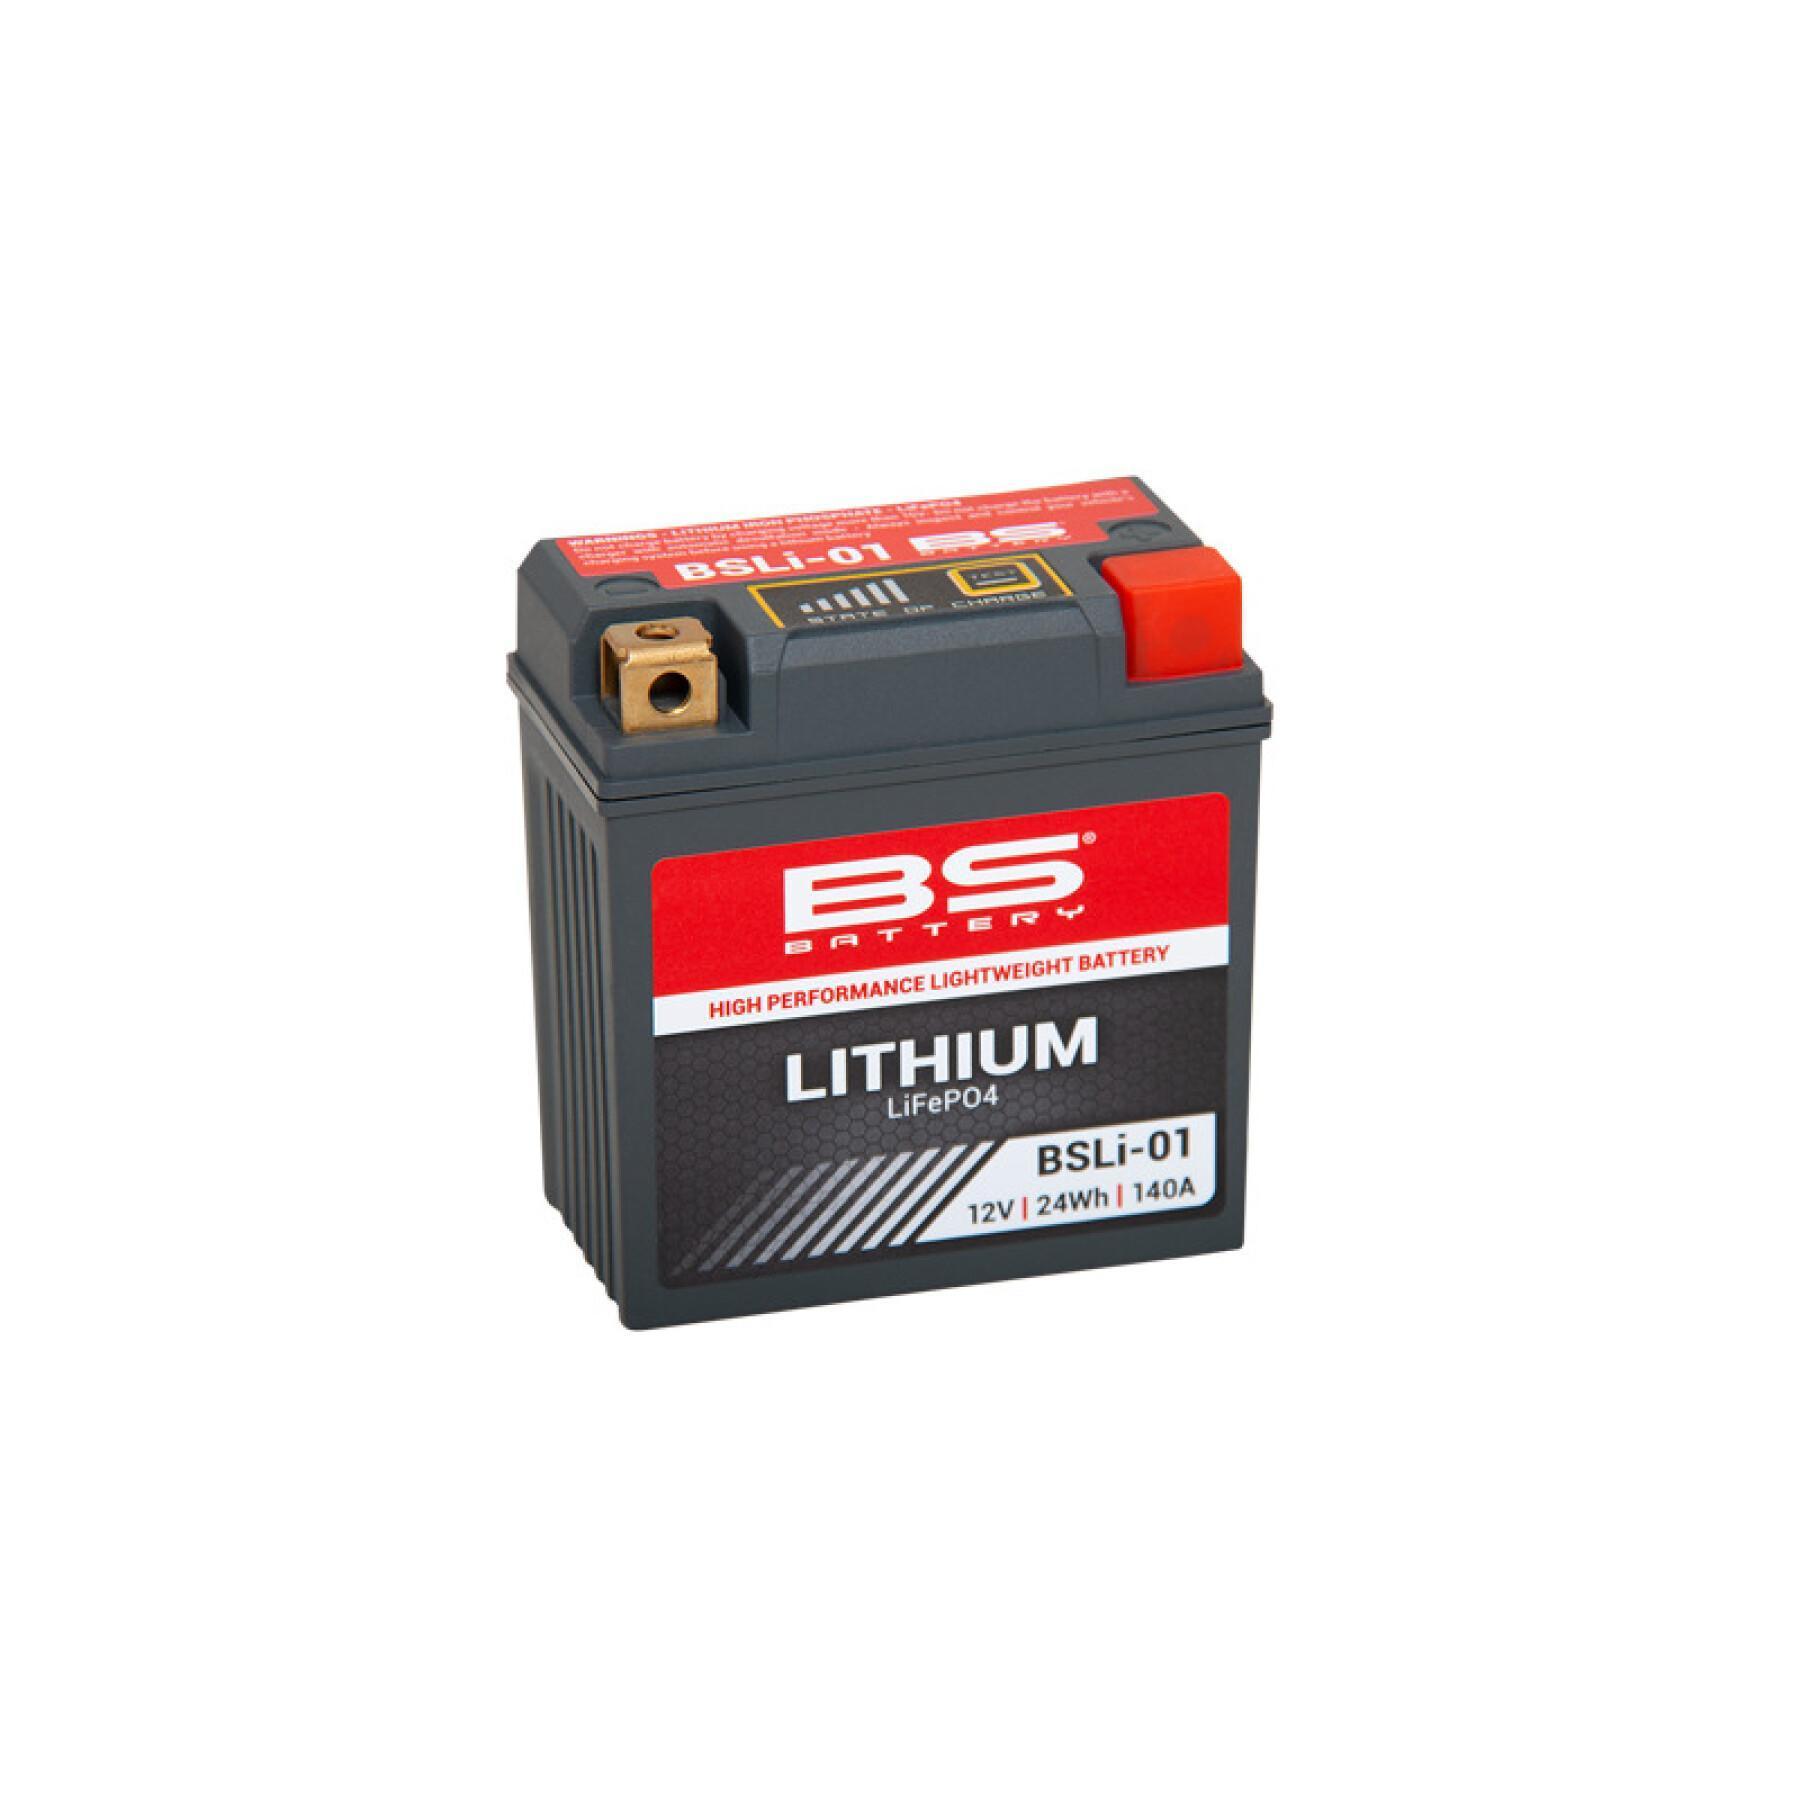 Lithium motorcycle battery BS Battery BSLI-01